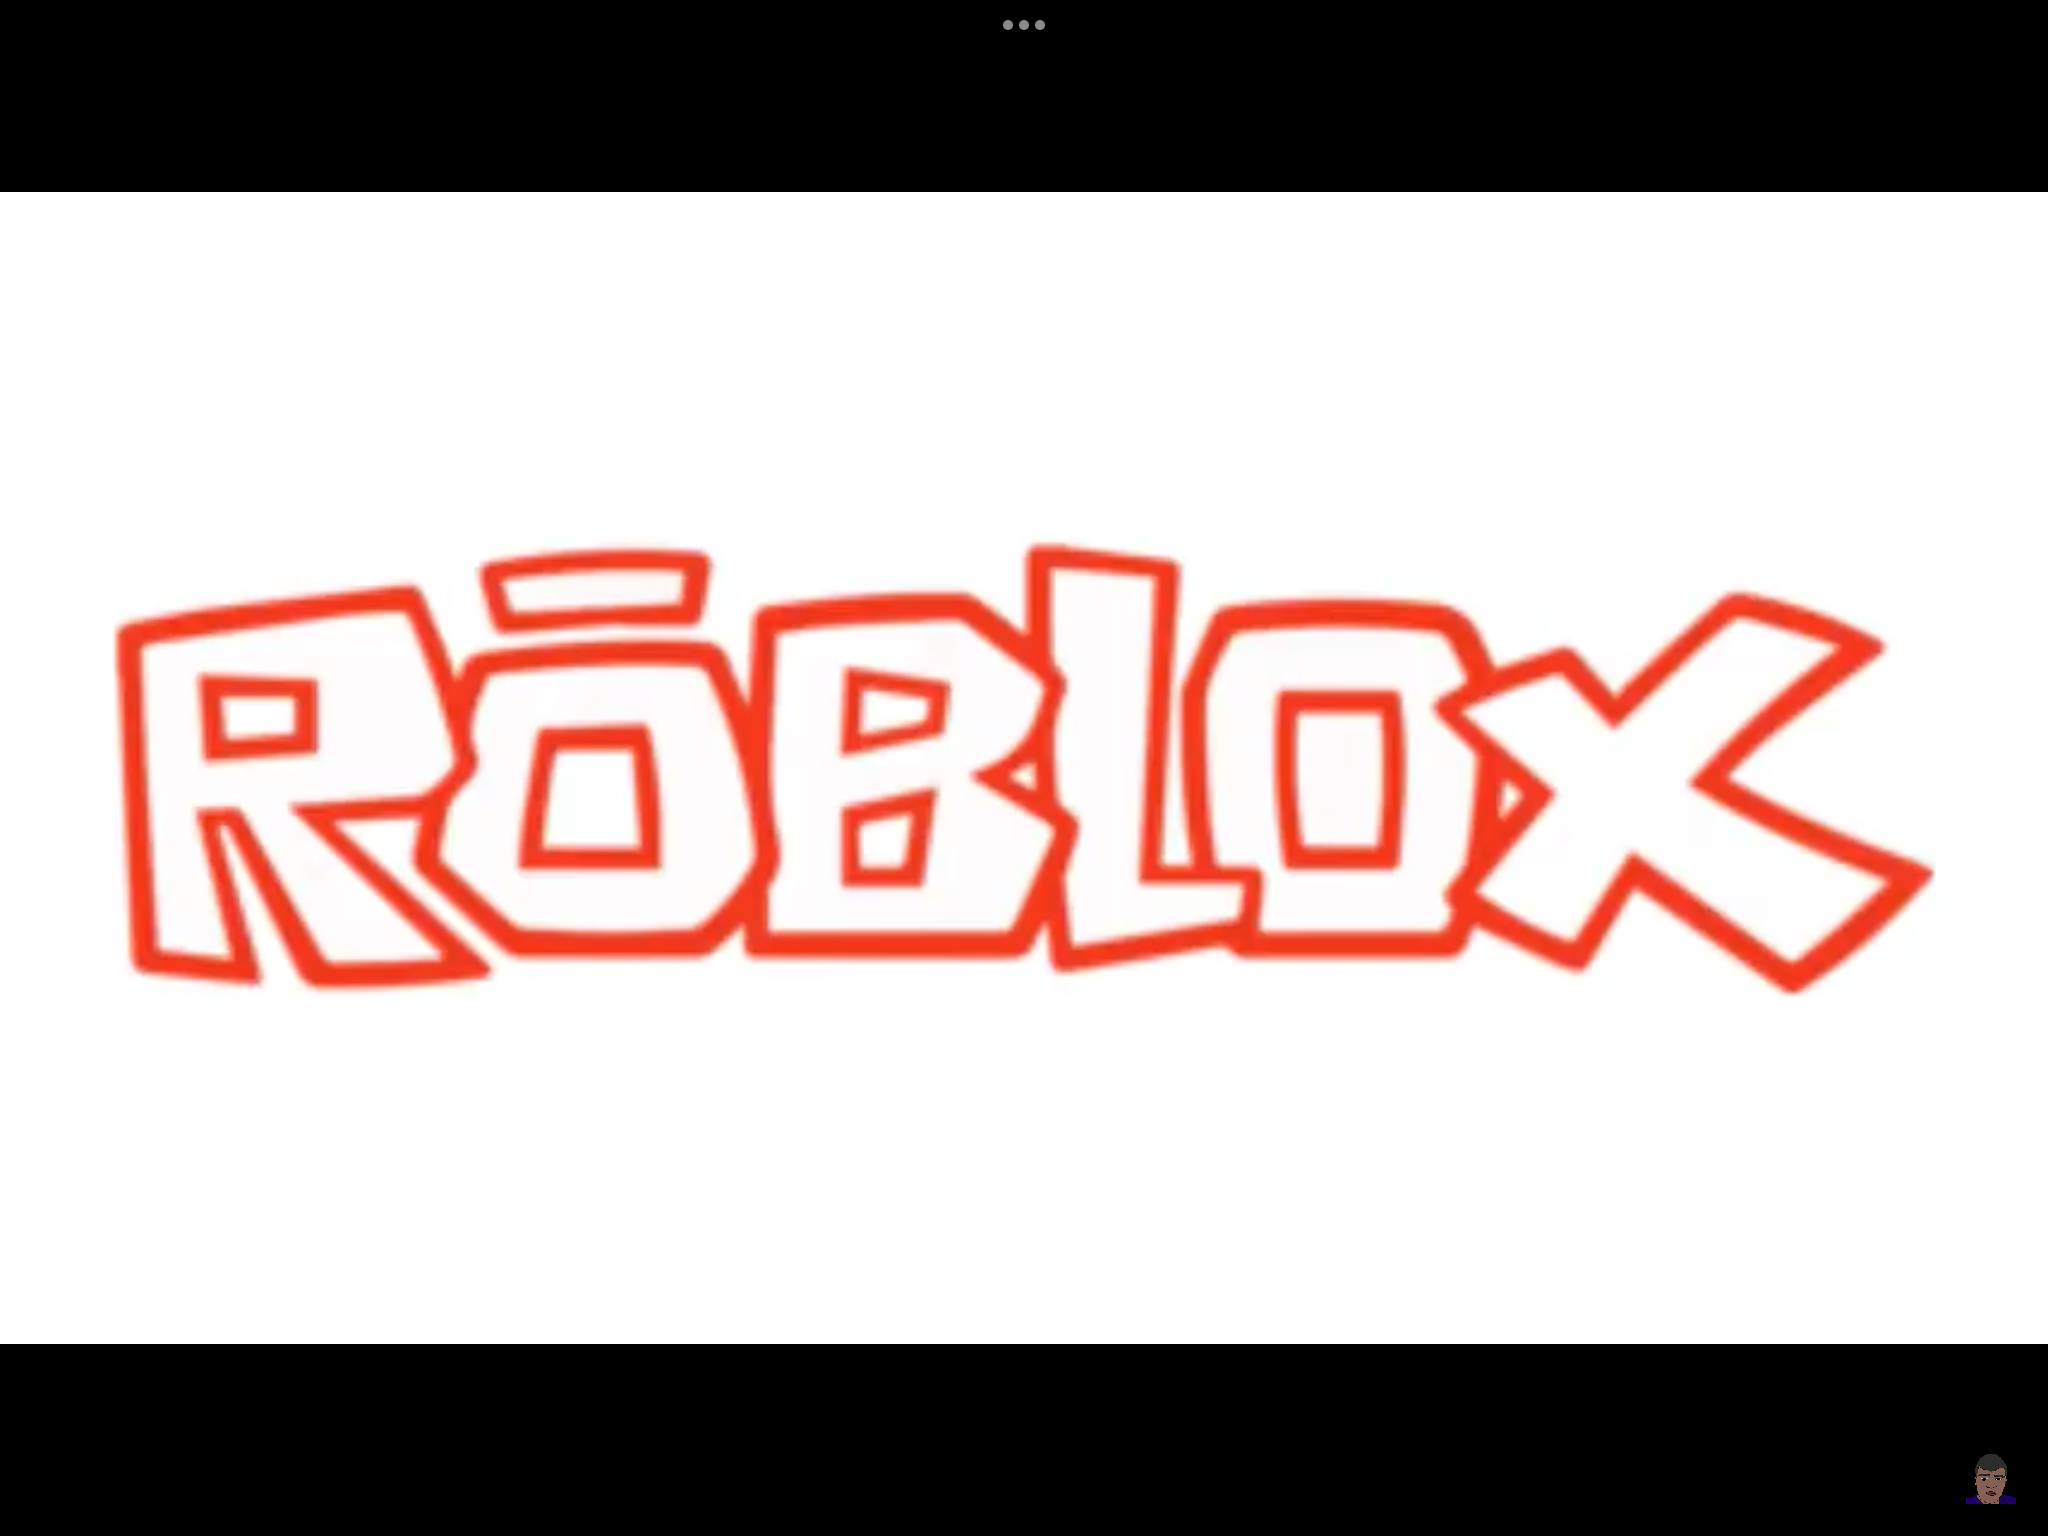 Roblox 2016 Logo - Transparent Background Old Roblox Logo Png,Roblox Logo -  free transparent png images 